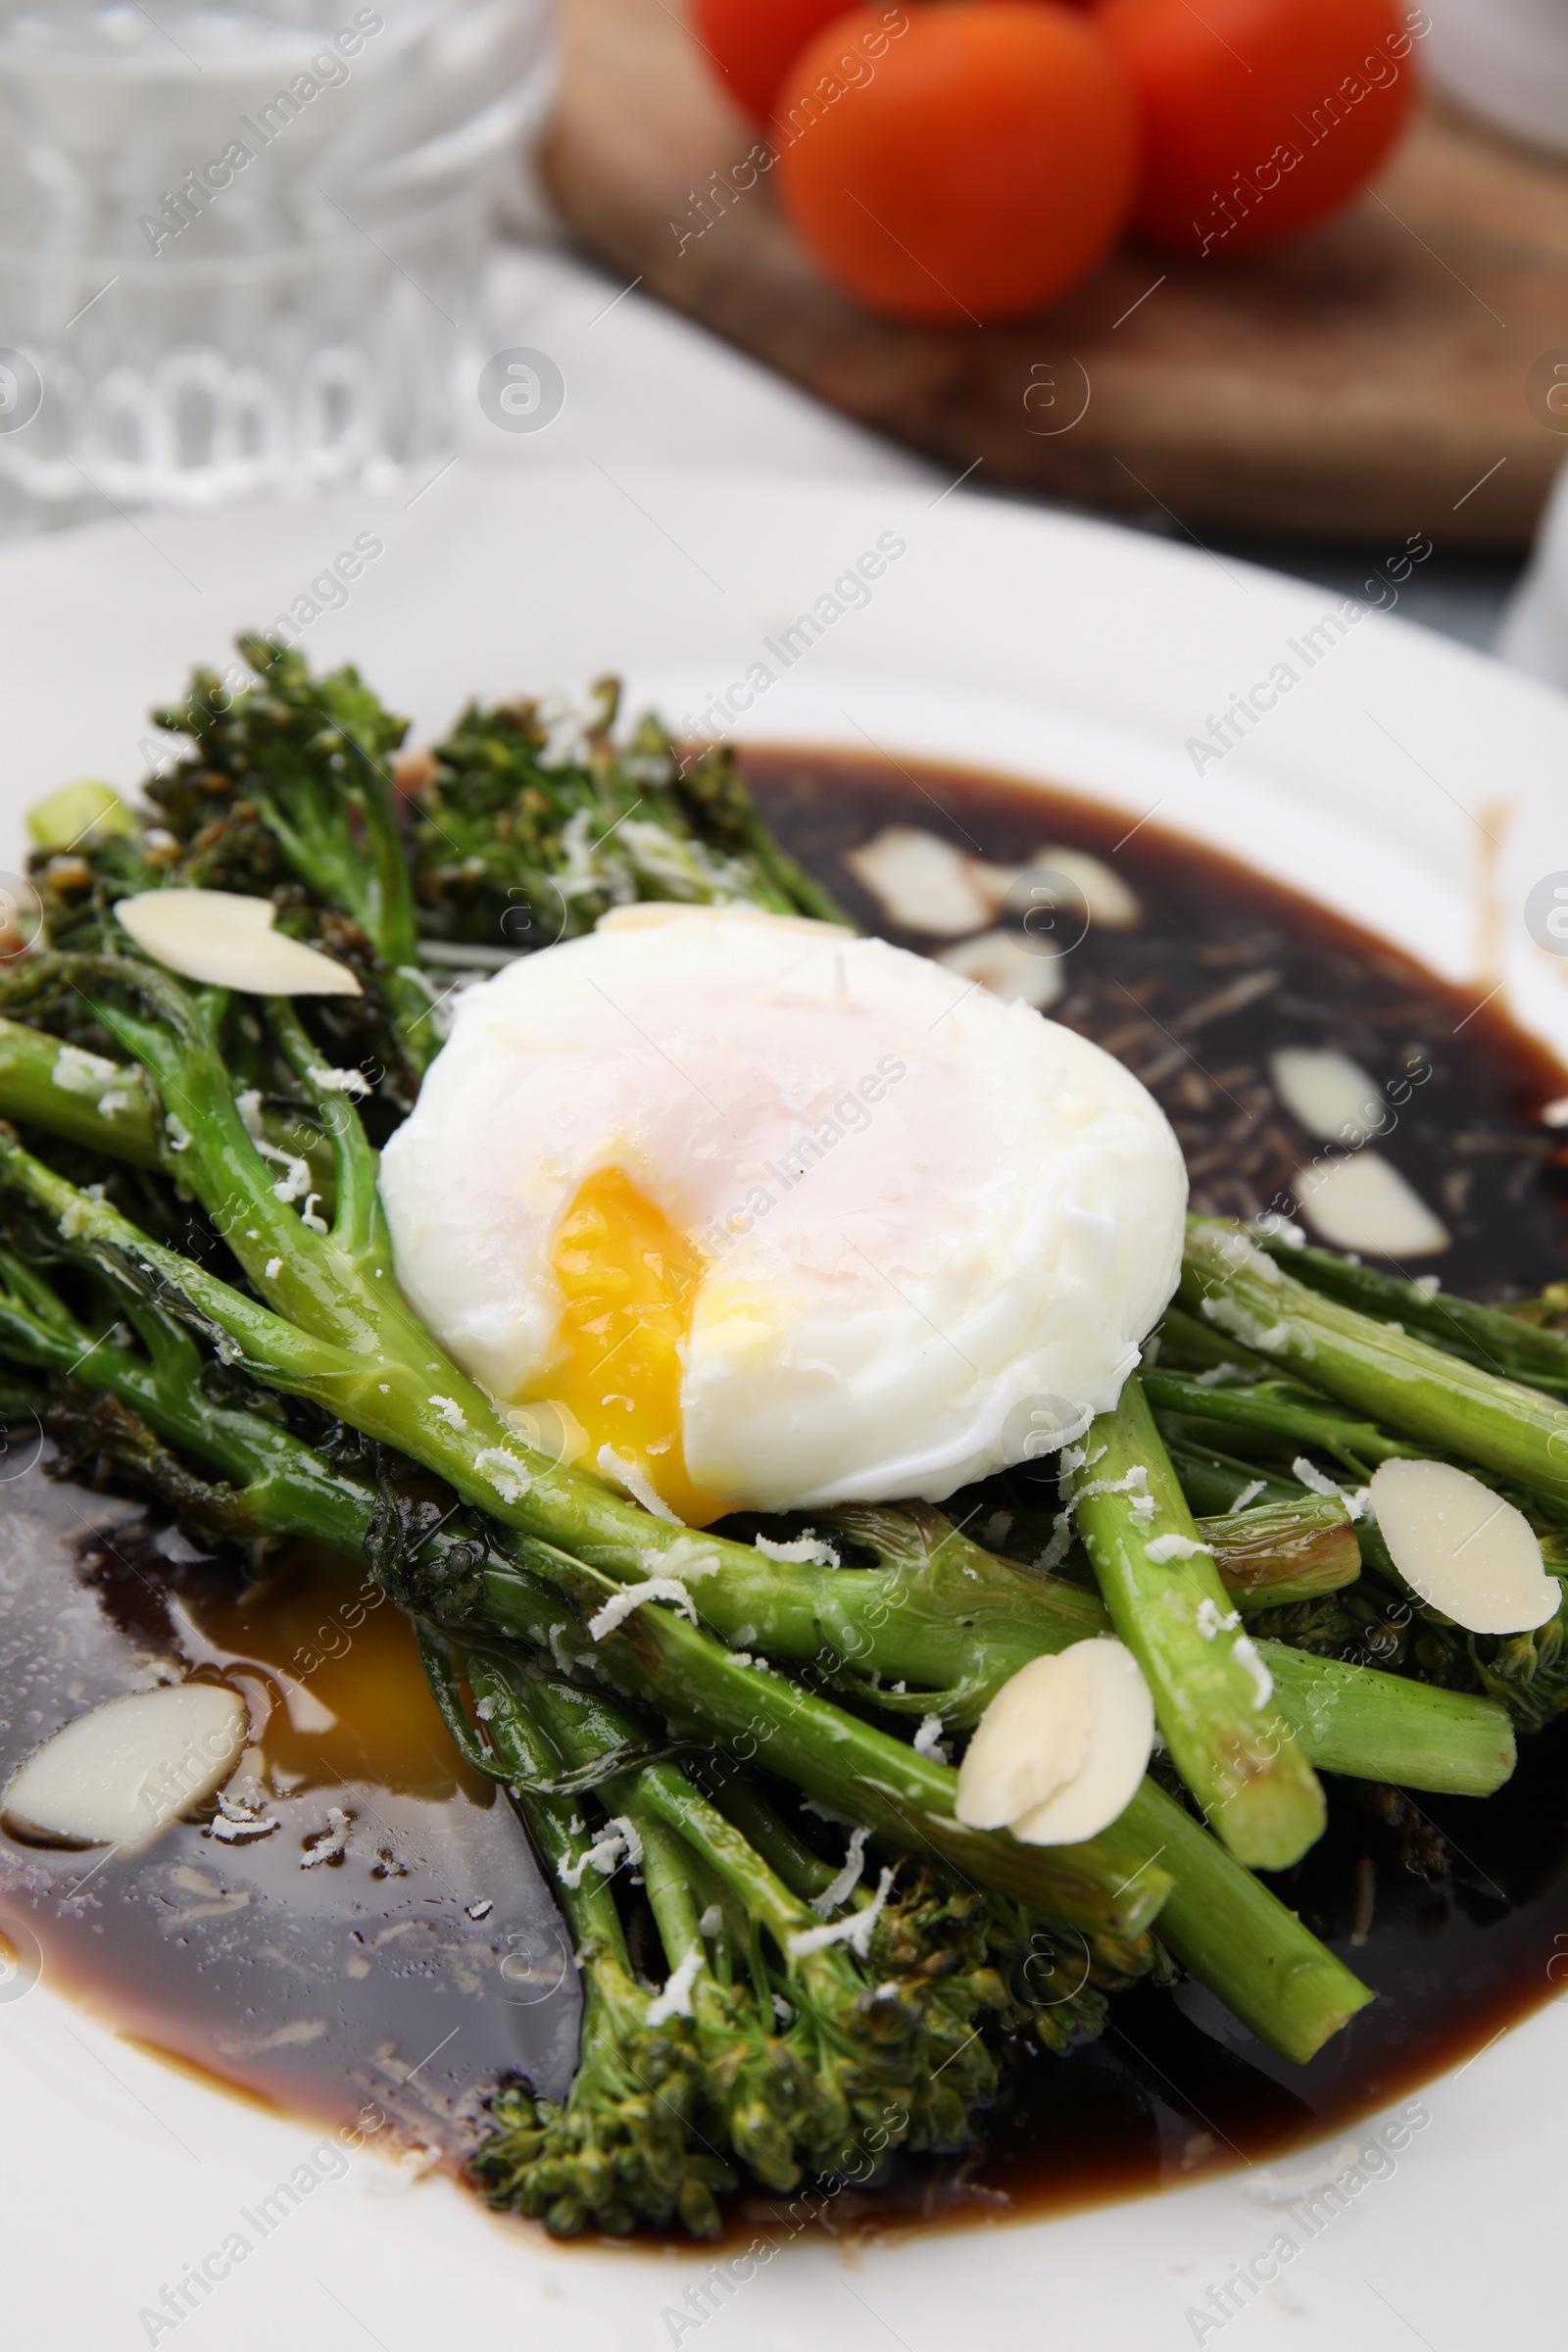 Photo of Tasty cooked broccolini with poached egg and sauce on plate, closeup